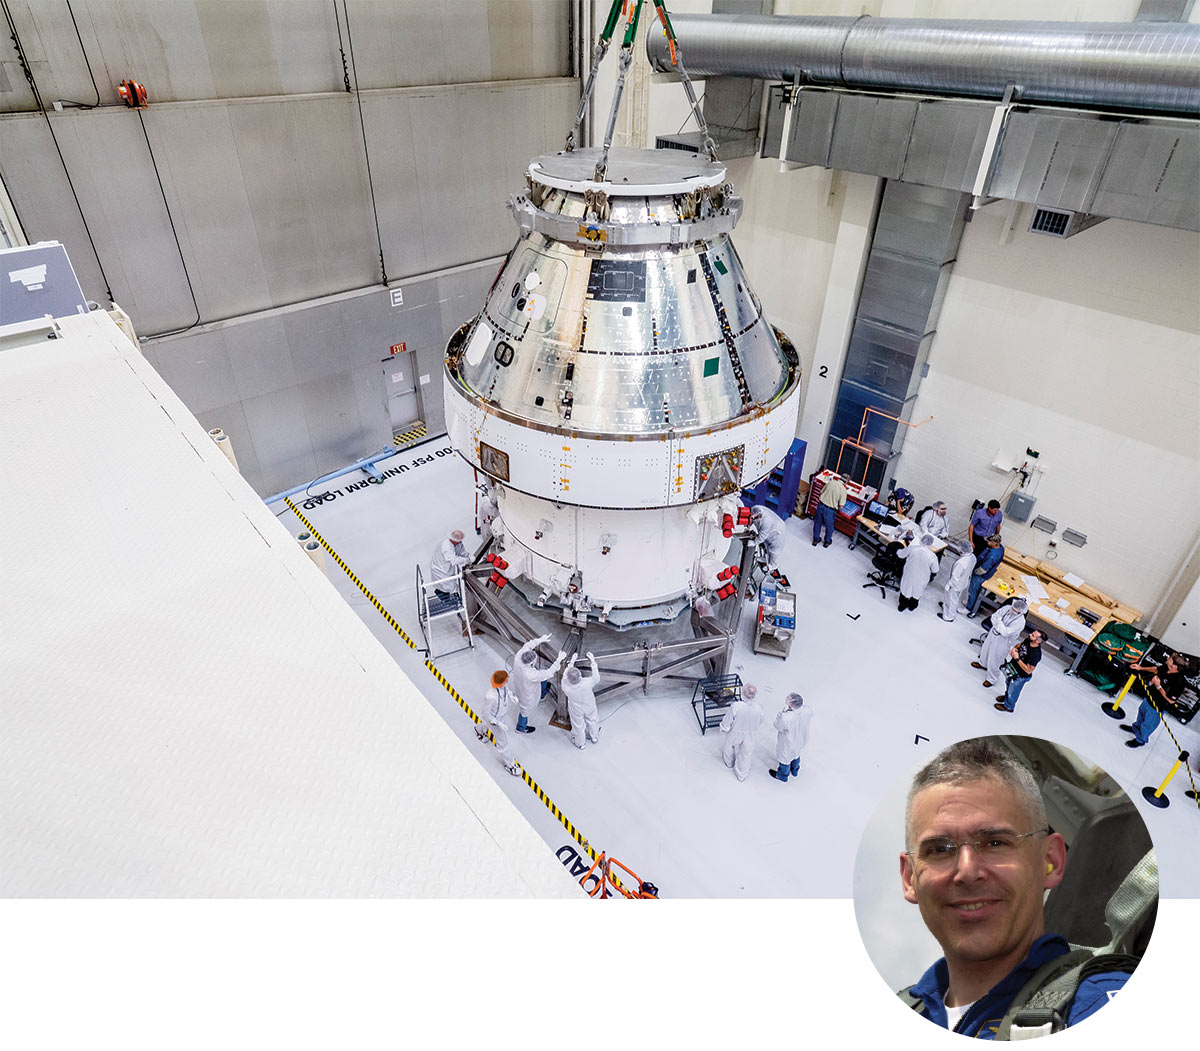 Lee Morin portrait and a look at the Orion spacecraft